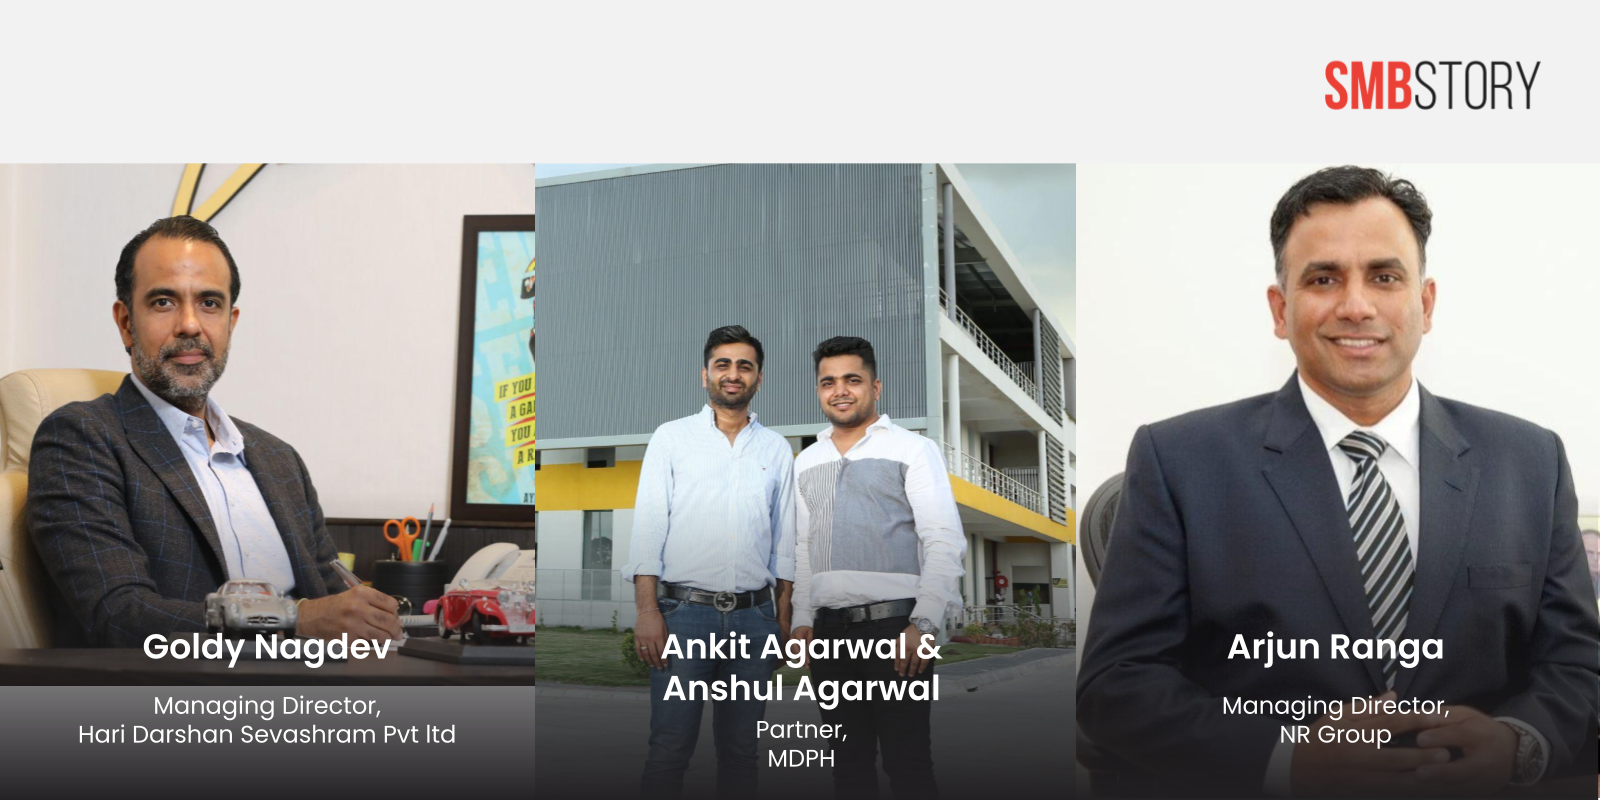 Meet 4 Indian agarbatti brands that started small to build successful multi-crore businesses